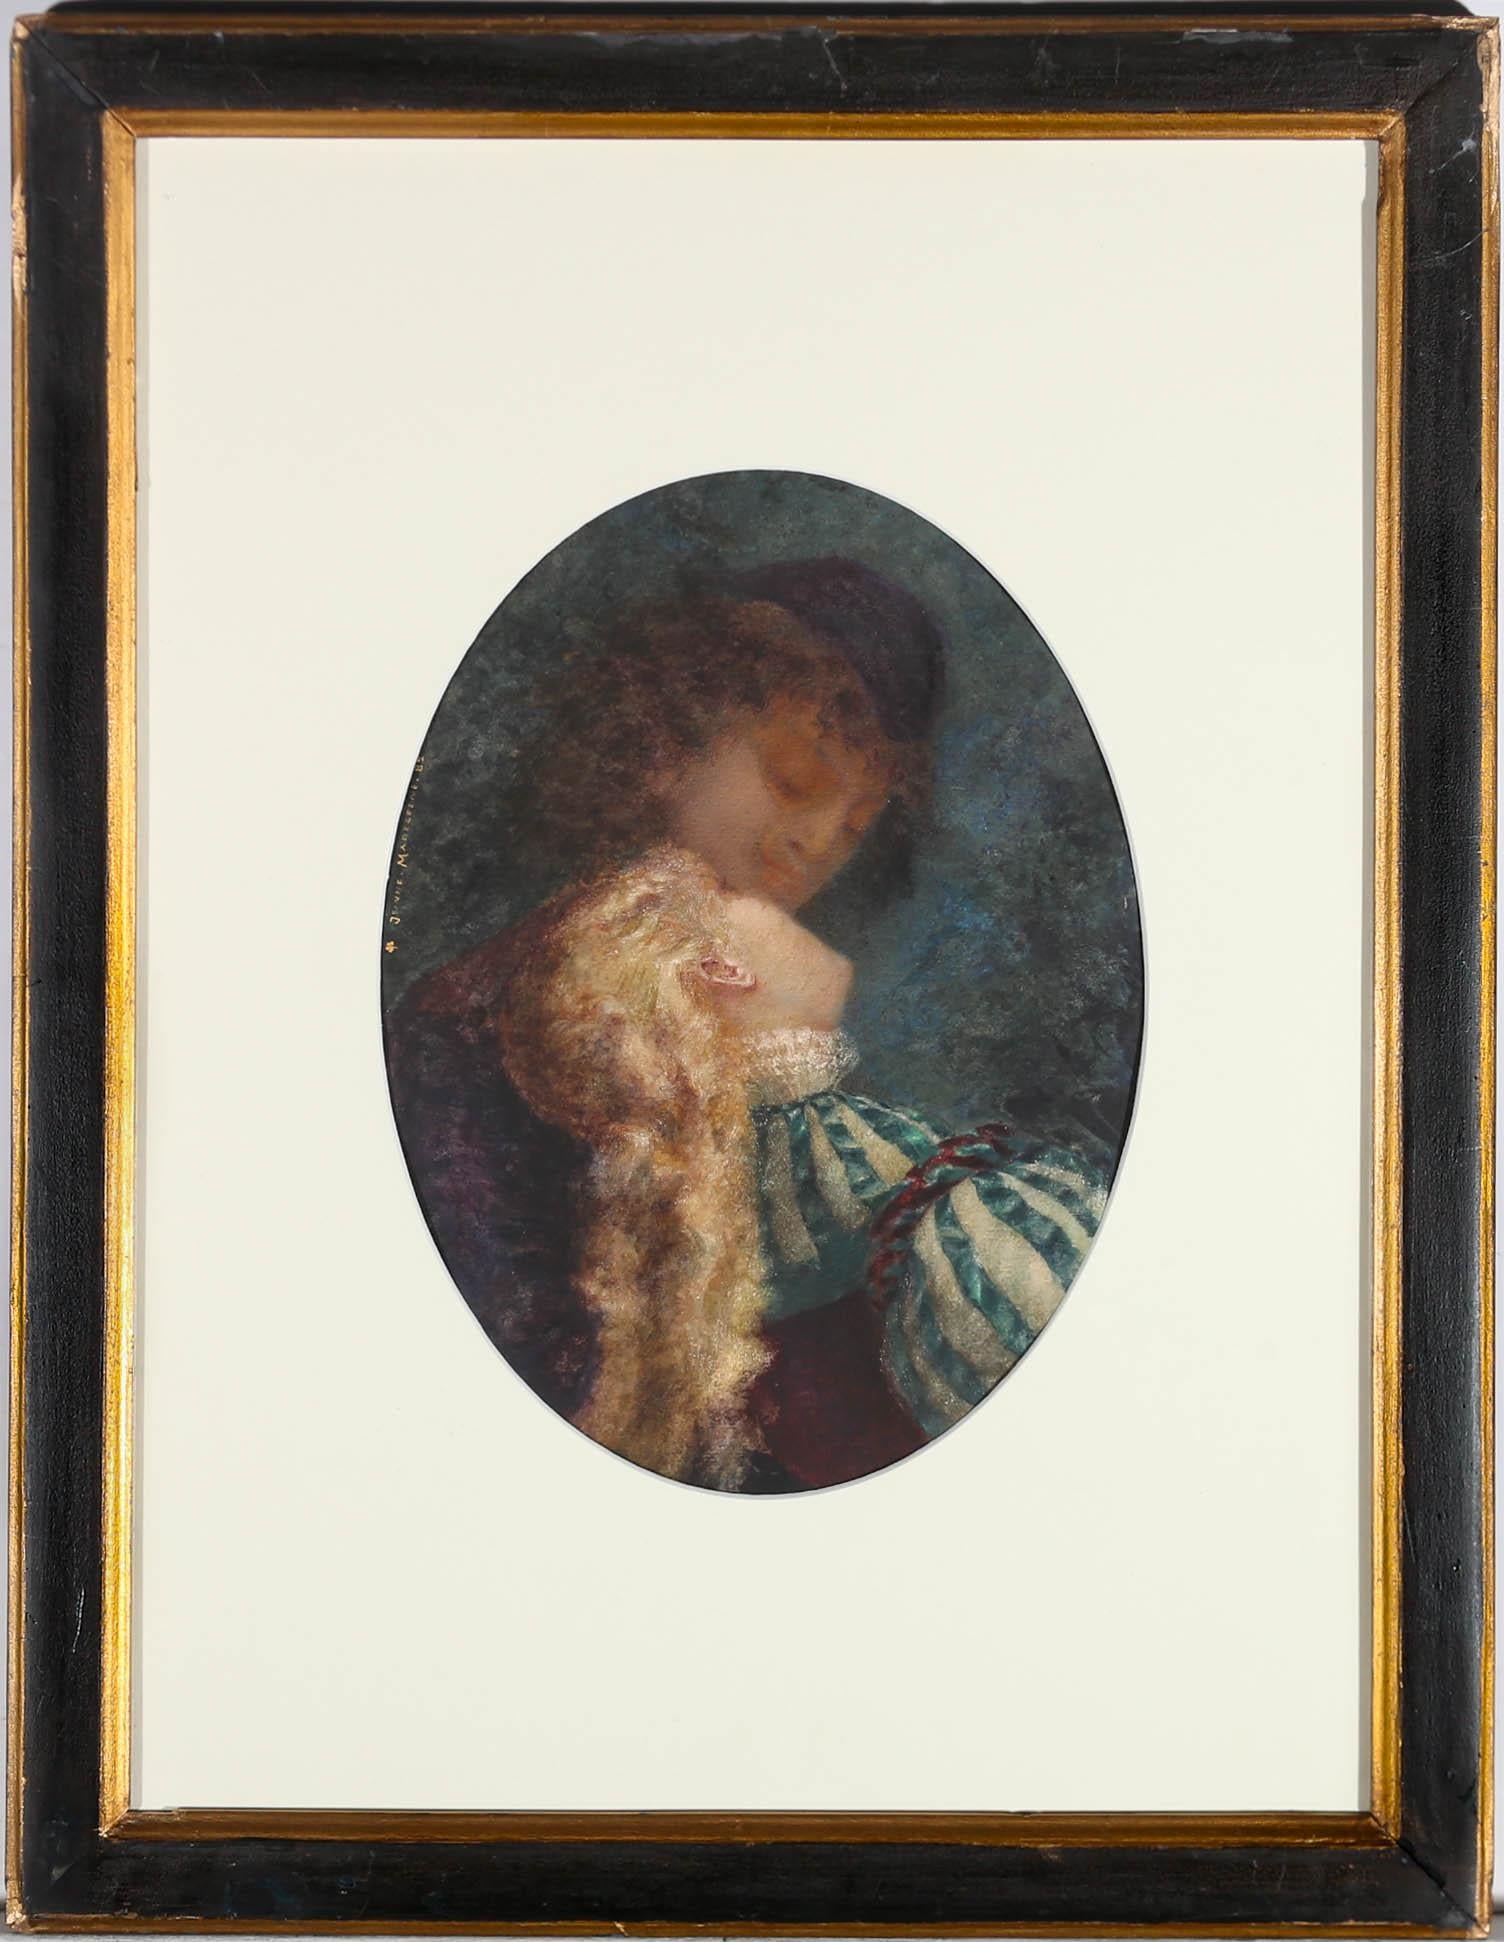 A romantic scene depicting a couple embracing under the shadow of trees. The woman is captured with her head tilted back, showing her striped dress and ruffled collar. Signed and dated to the upper left of the piece. Inscribed with title Sous Les